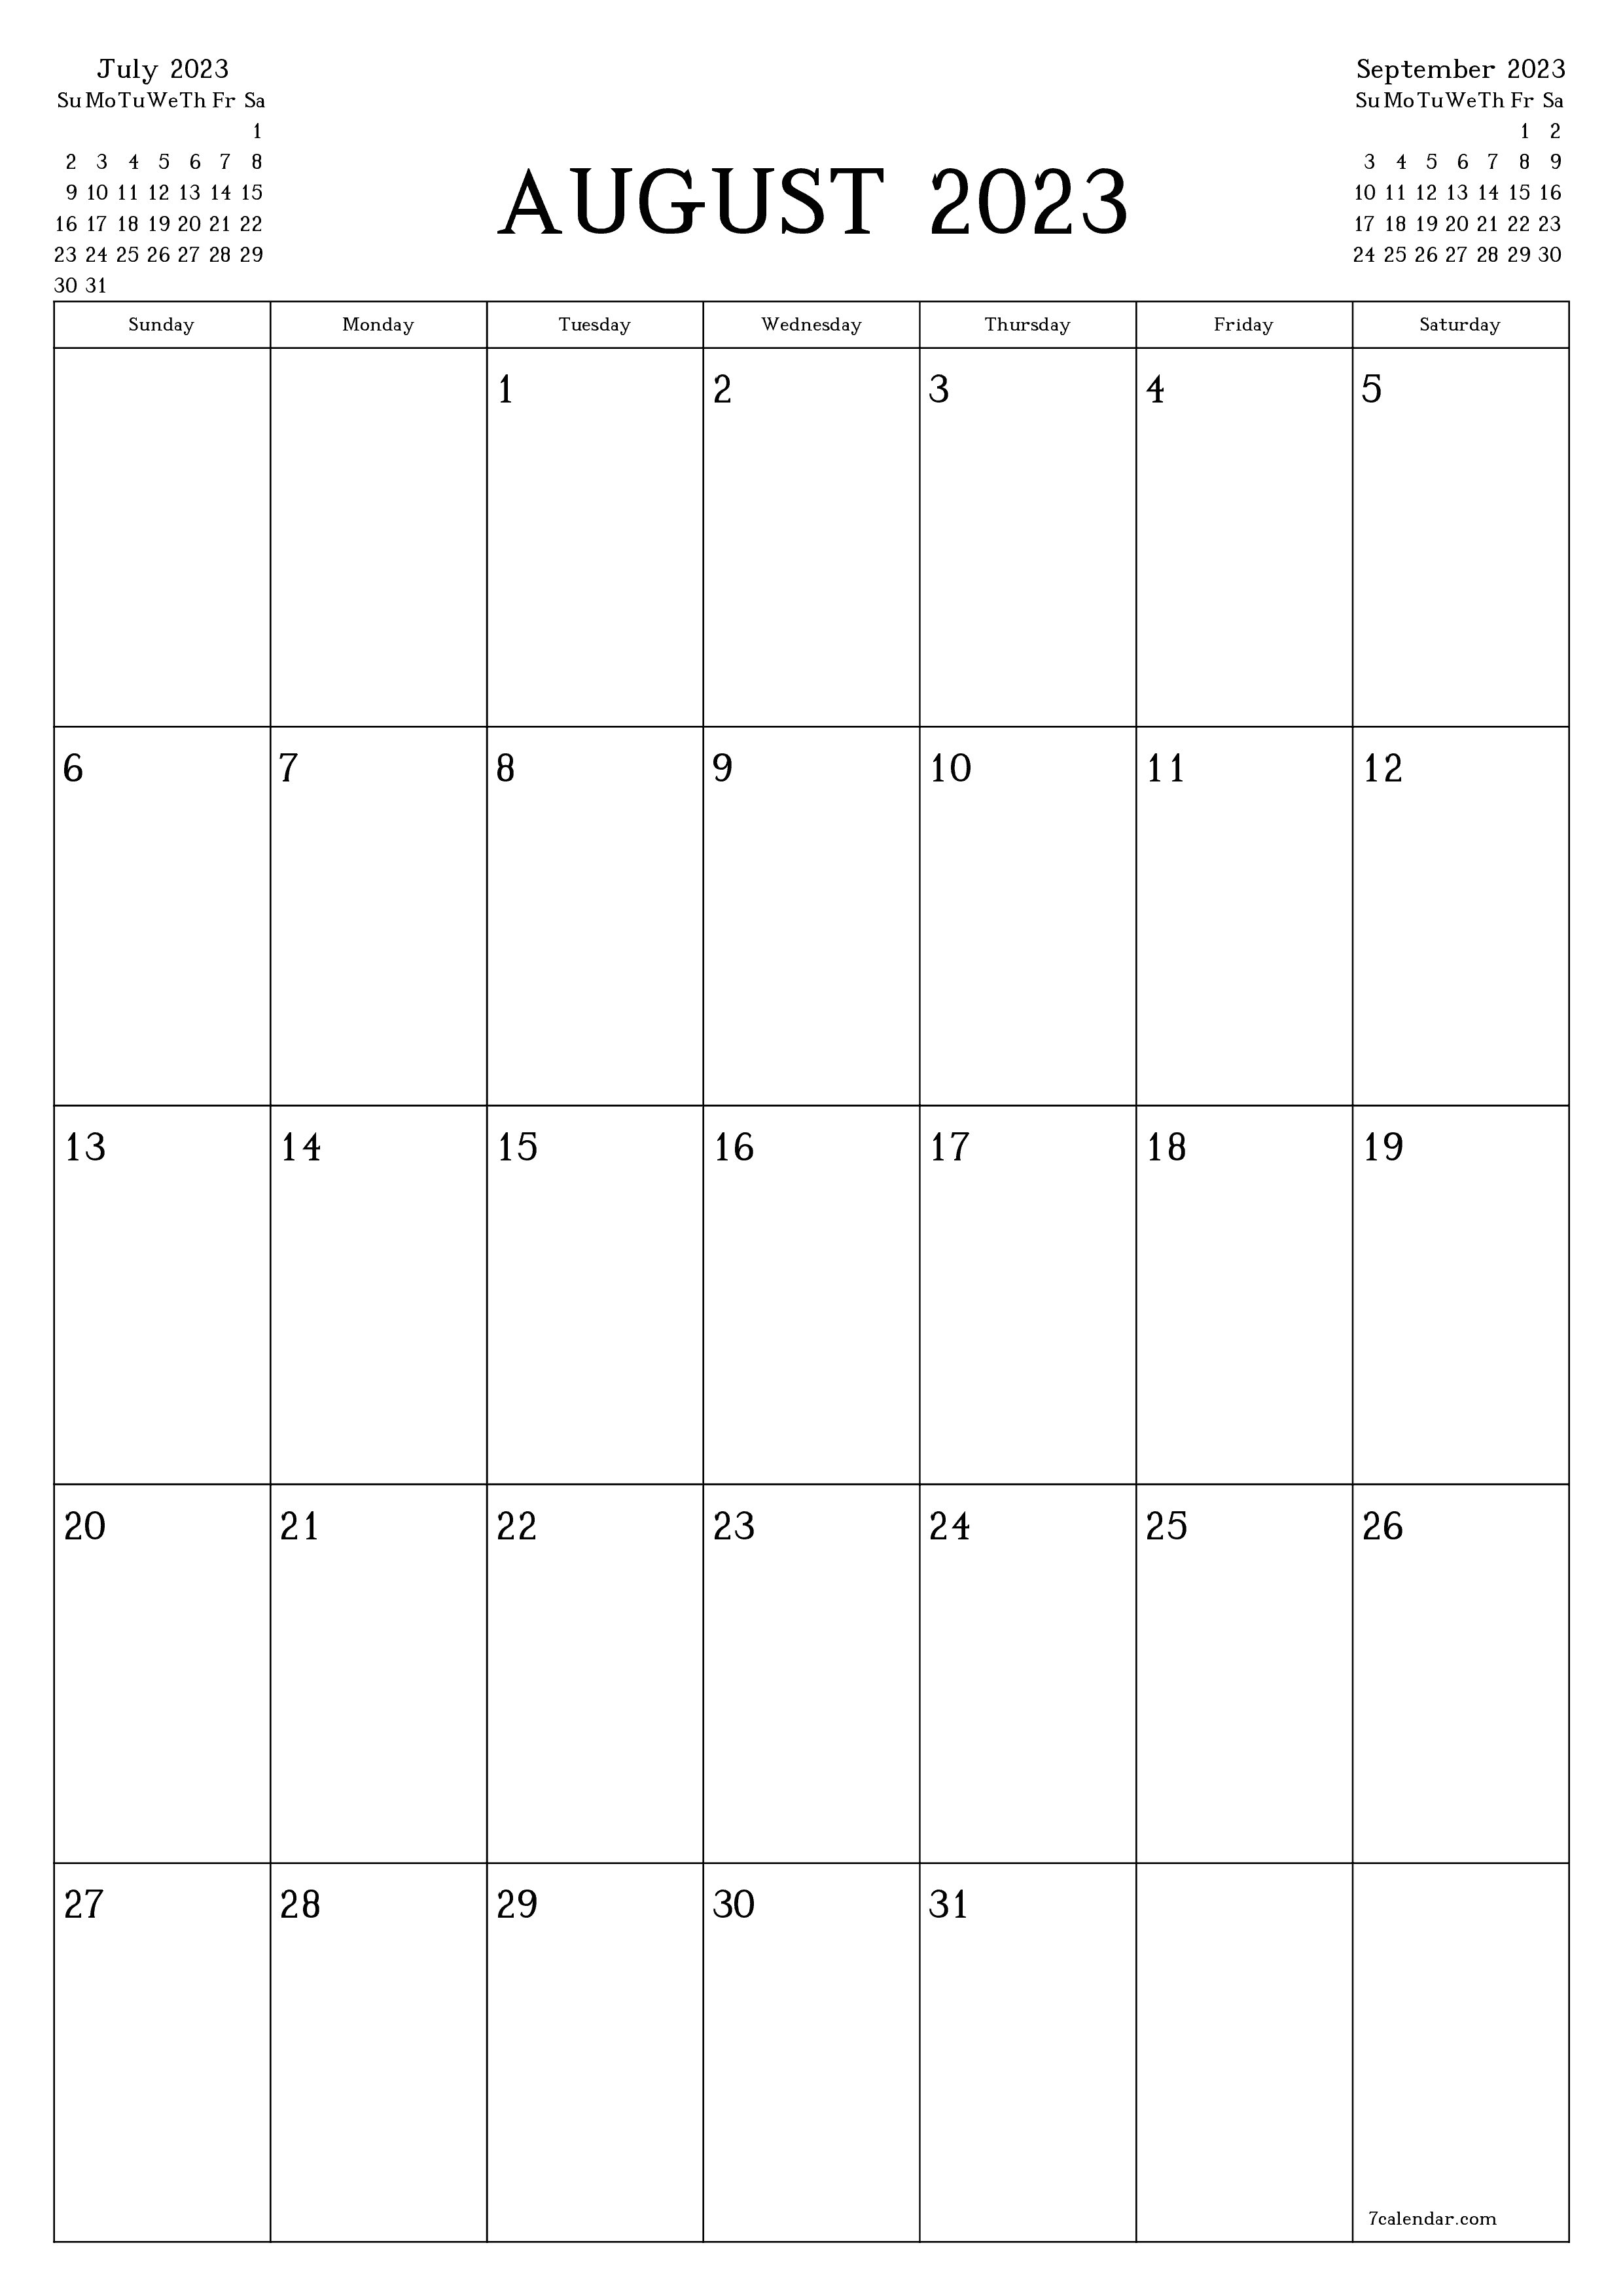 Blank monthly calendar planner for month August 2023 with notes save and print to PDF PNG English - 7calendar.com